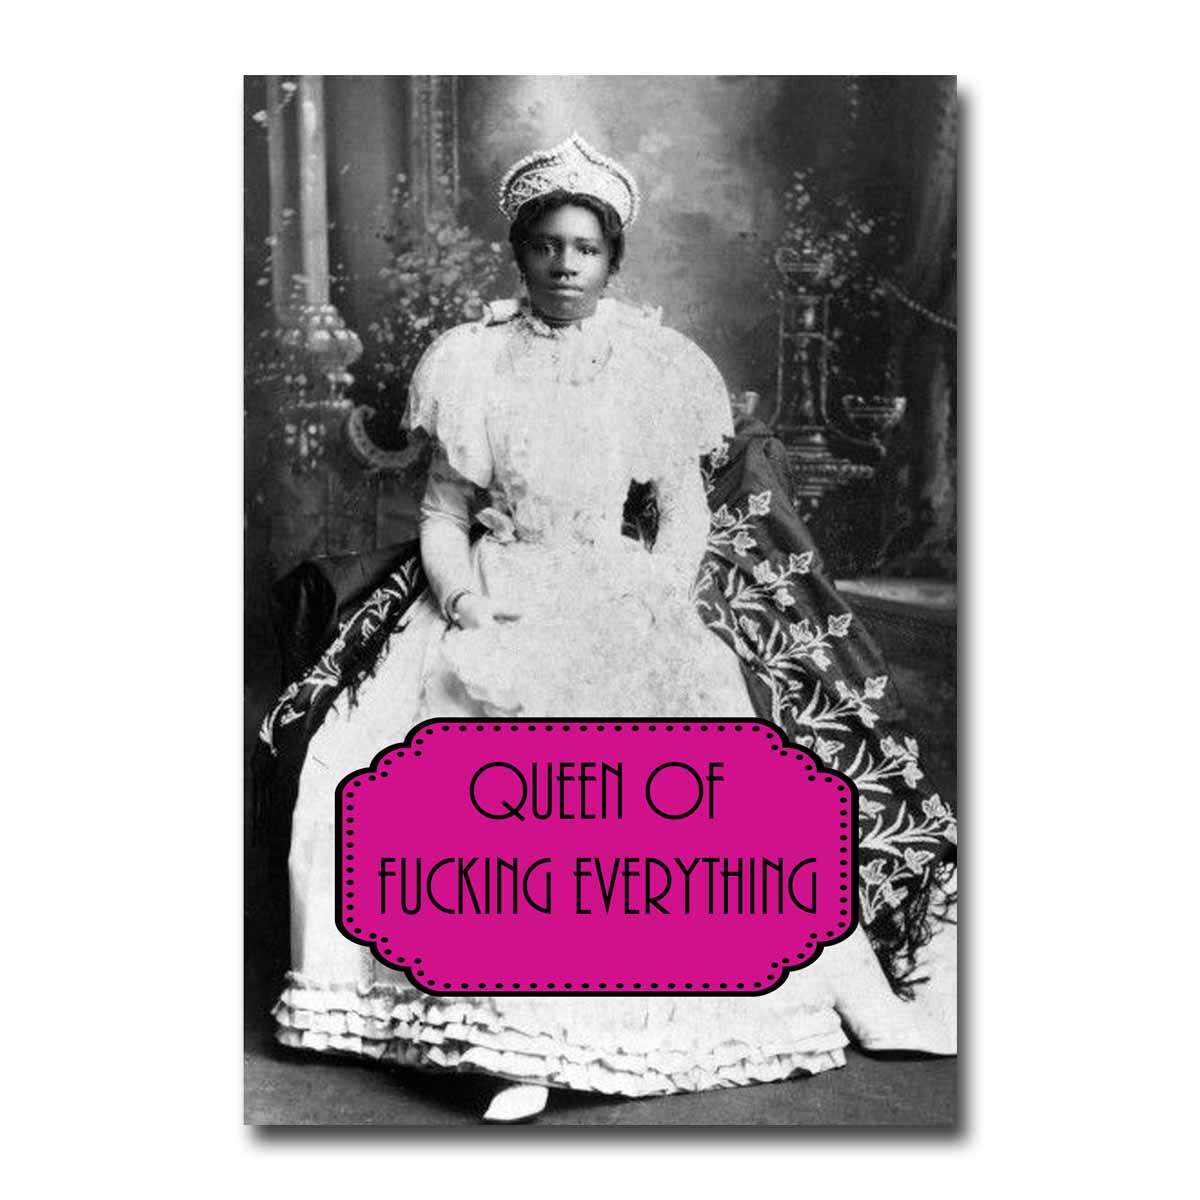 Queen of Fucking Everything Postcard